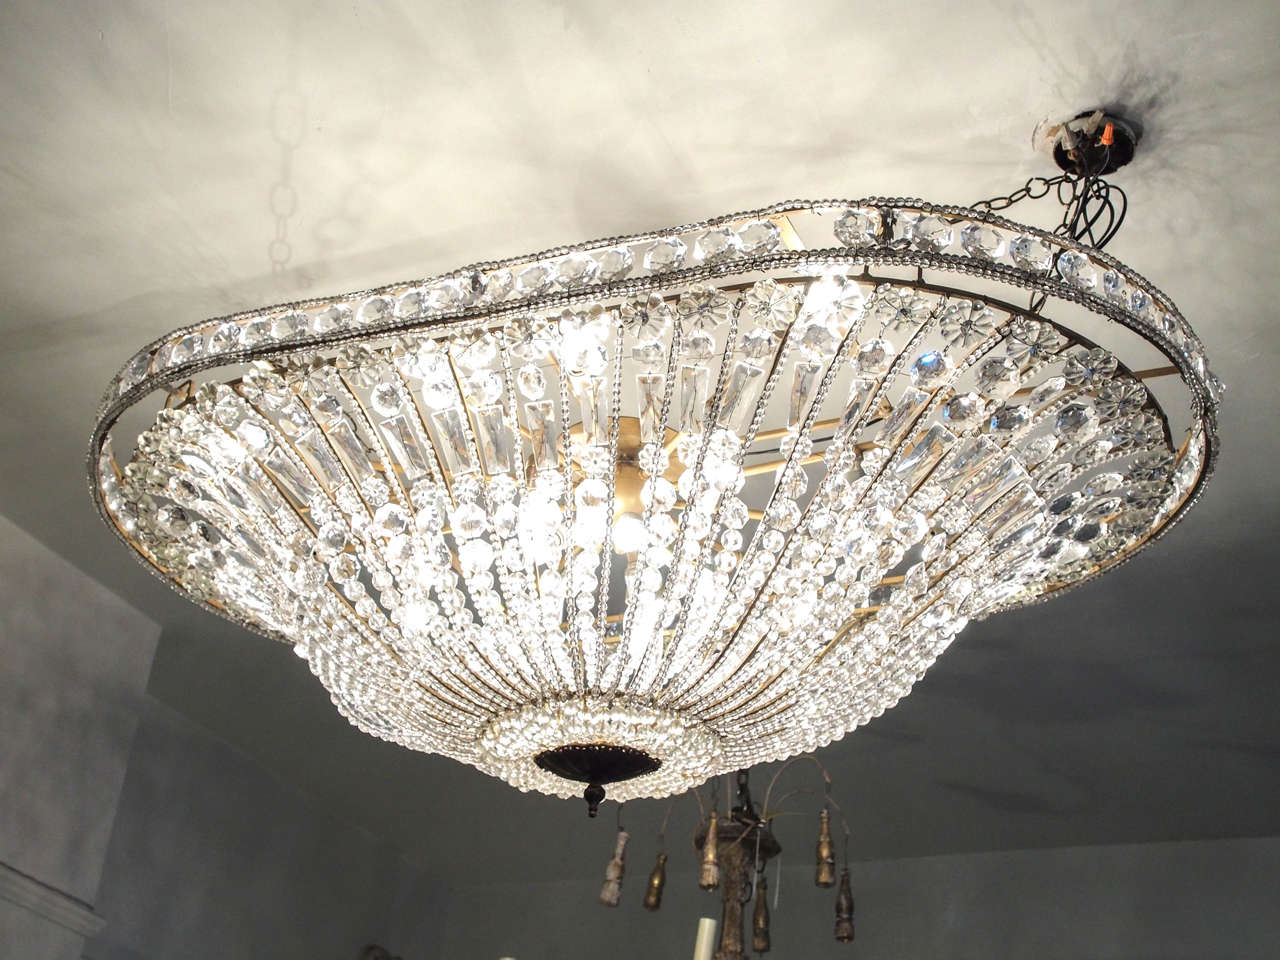 Late 19th century. Flush mount very large oval crystal and bronze chandelier. Empire style. Eighteen-lights. Crystals are beaded and attached to each rod. Comes from an old hotel in Paris. US wired.